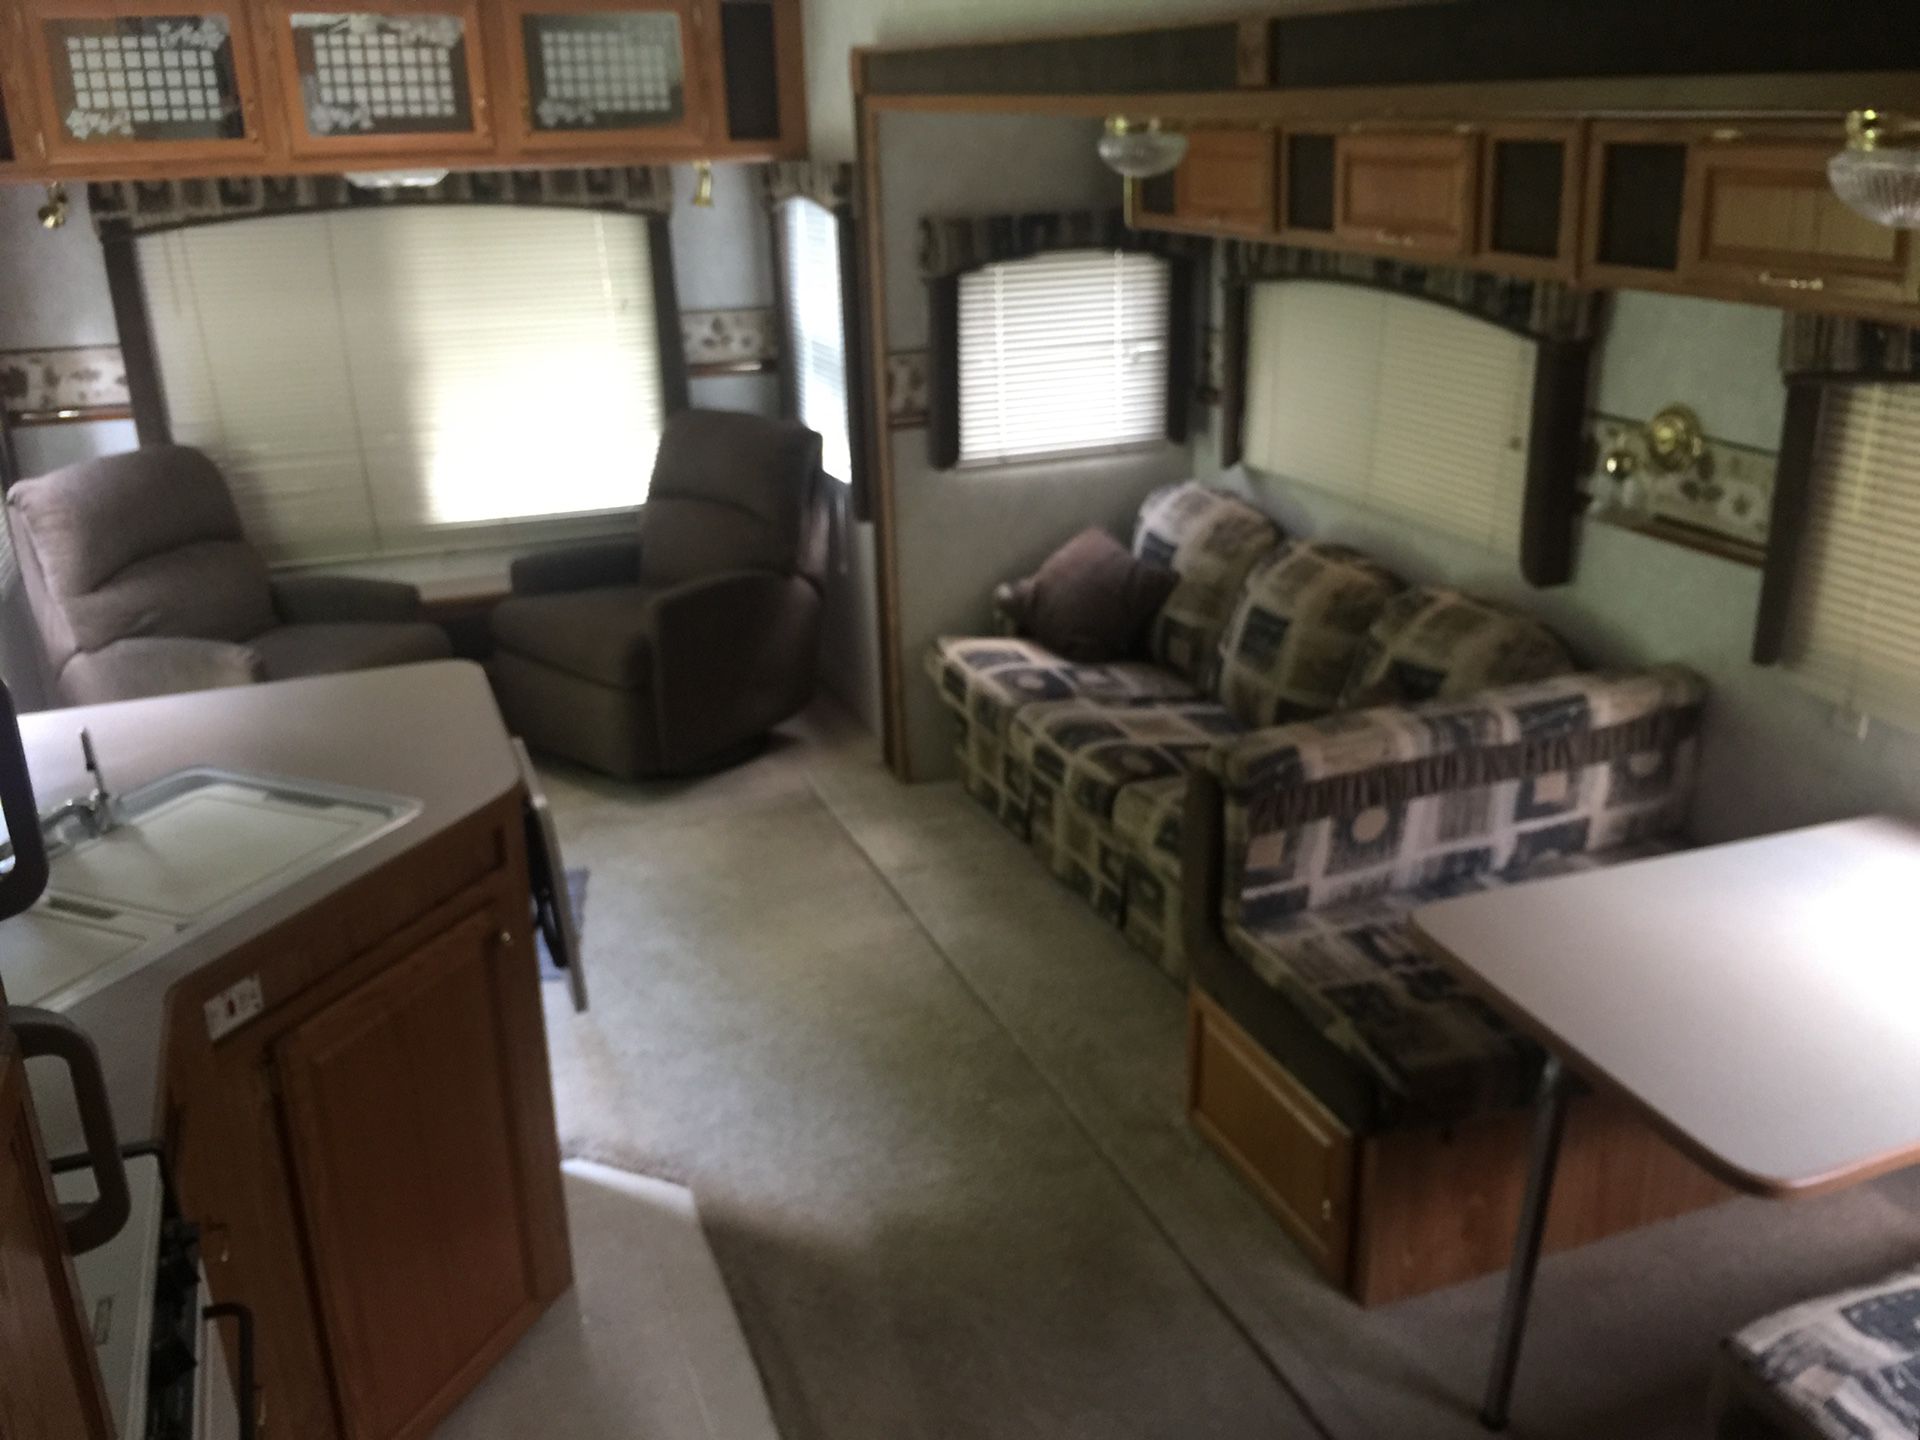 2004 36’ Wilderness Fleetwood RV- Fifth Wheel*Excellent Condition-Very Well Maintained*